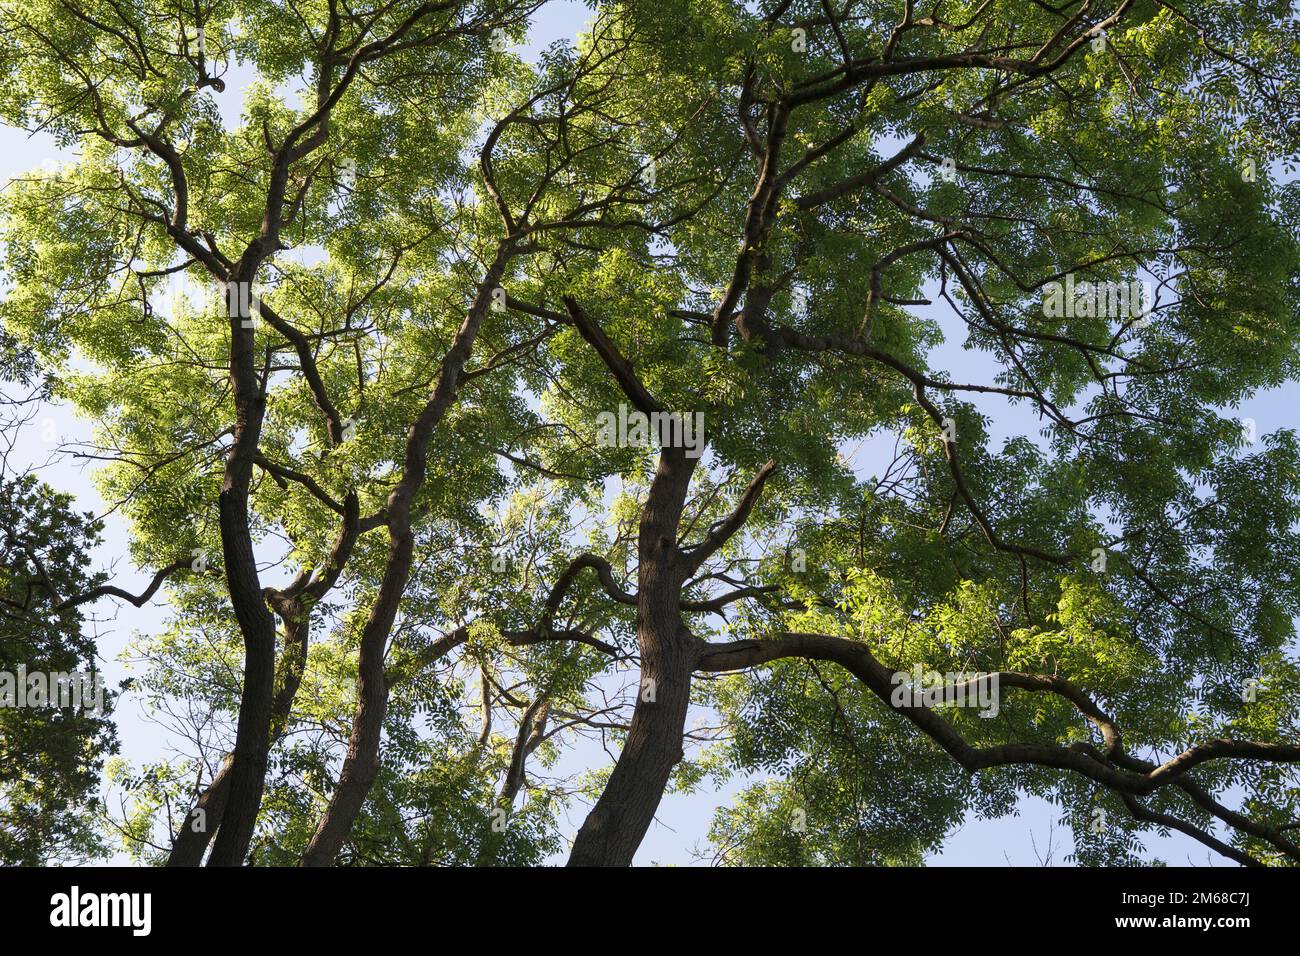 Looking up into the summer canopy of deciduous trees Stock Photo